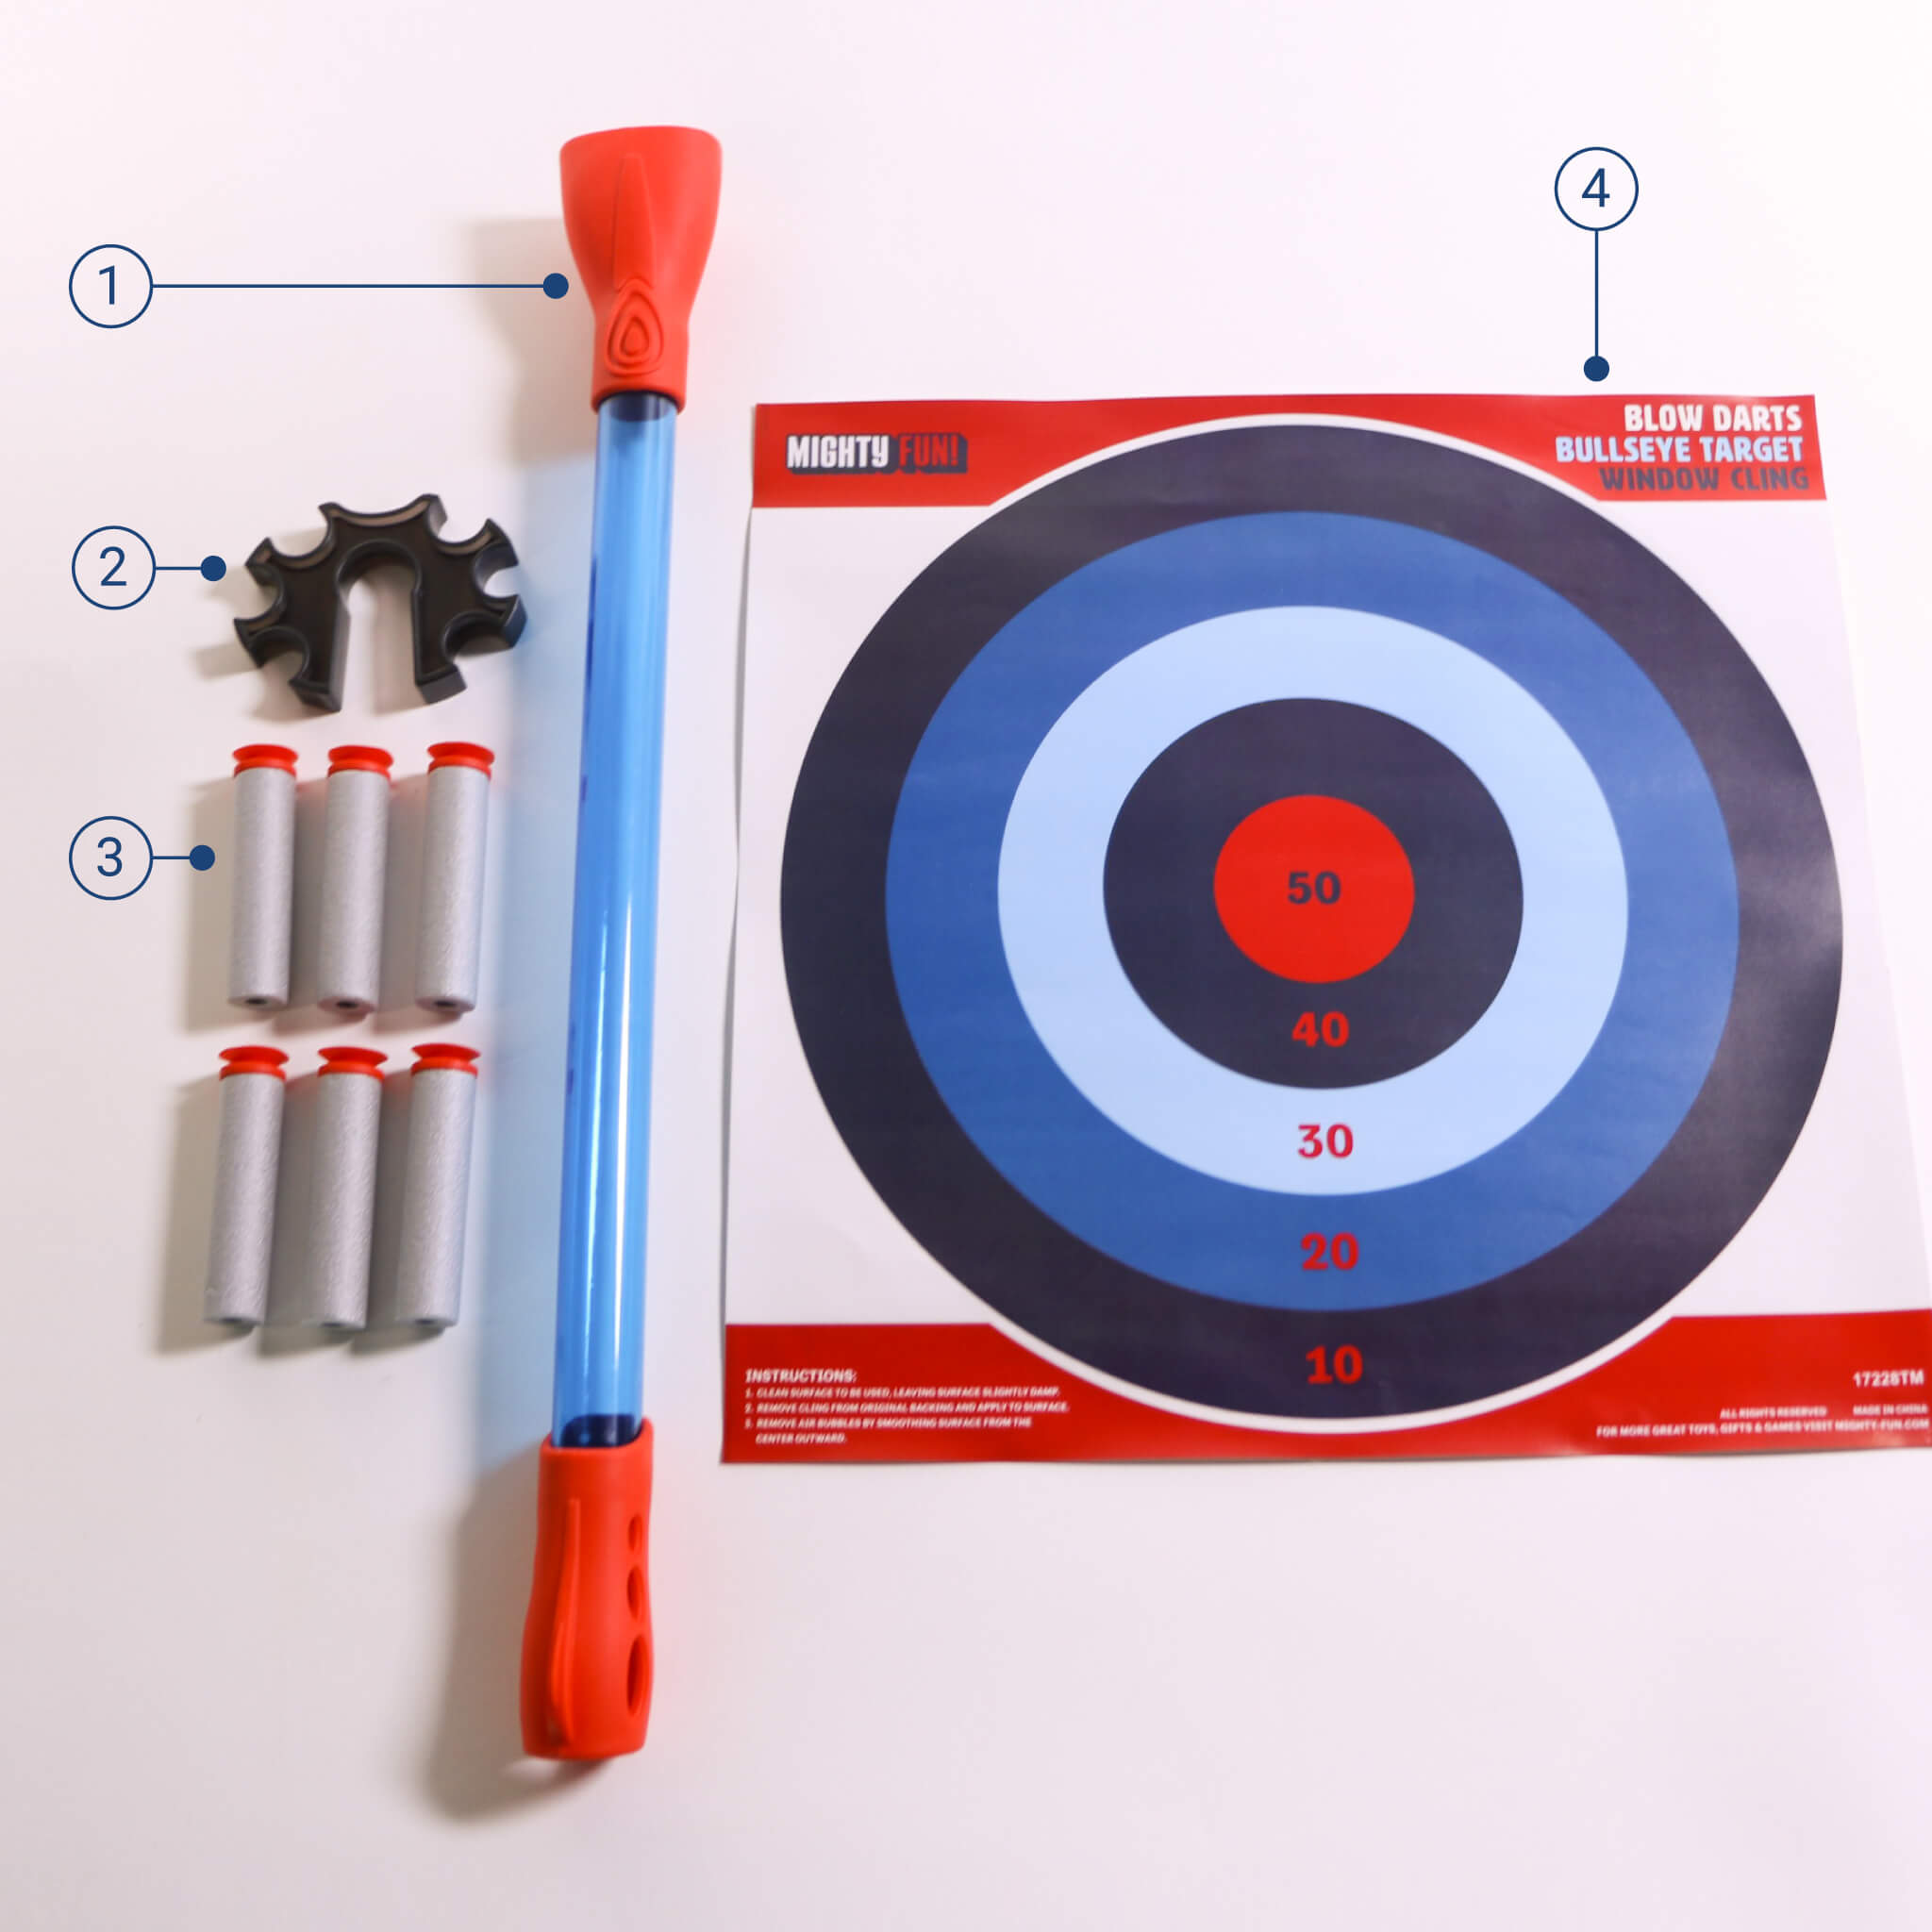 Blow Darts target set by Mighty Fun! Includes 6 darts, ammo holder and target. With detail callouts.